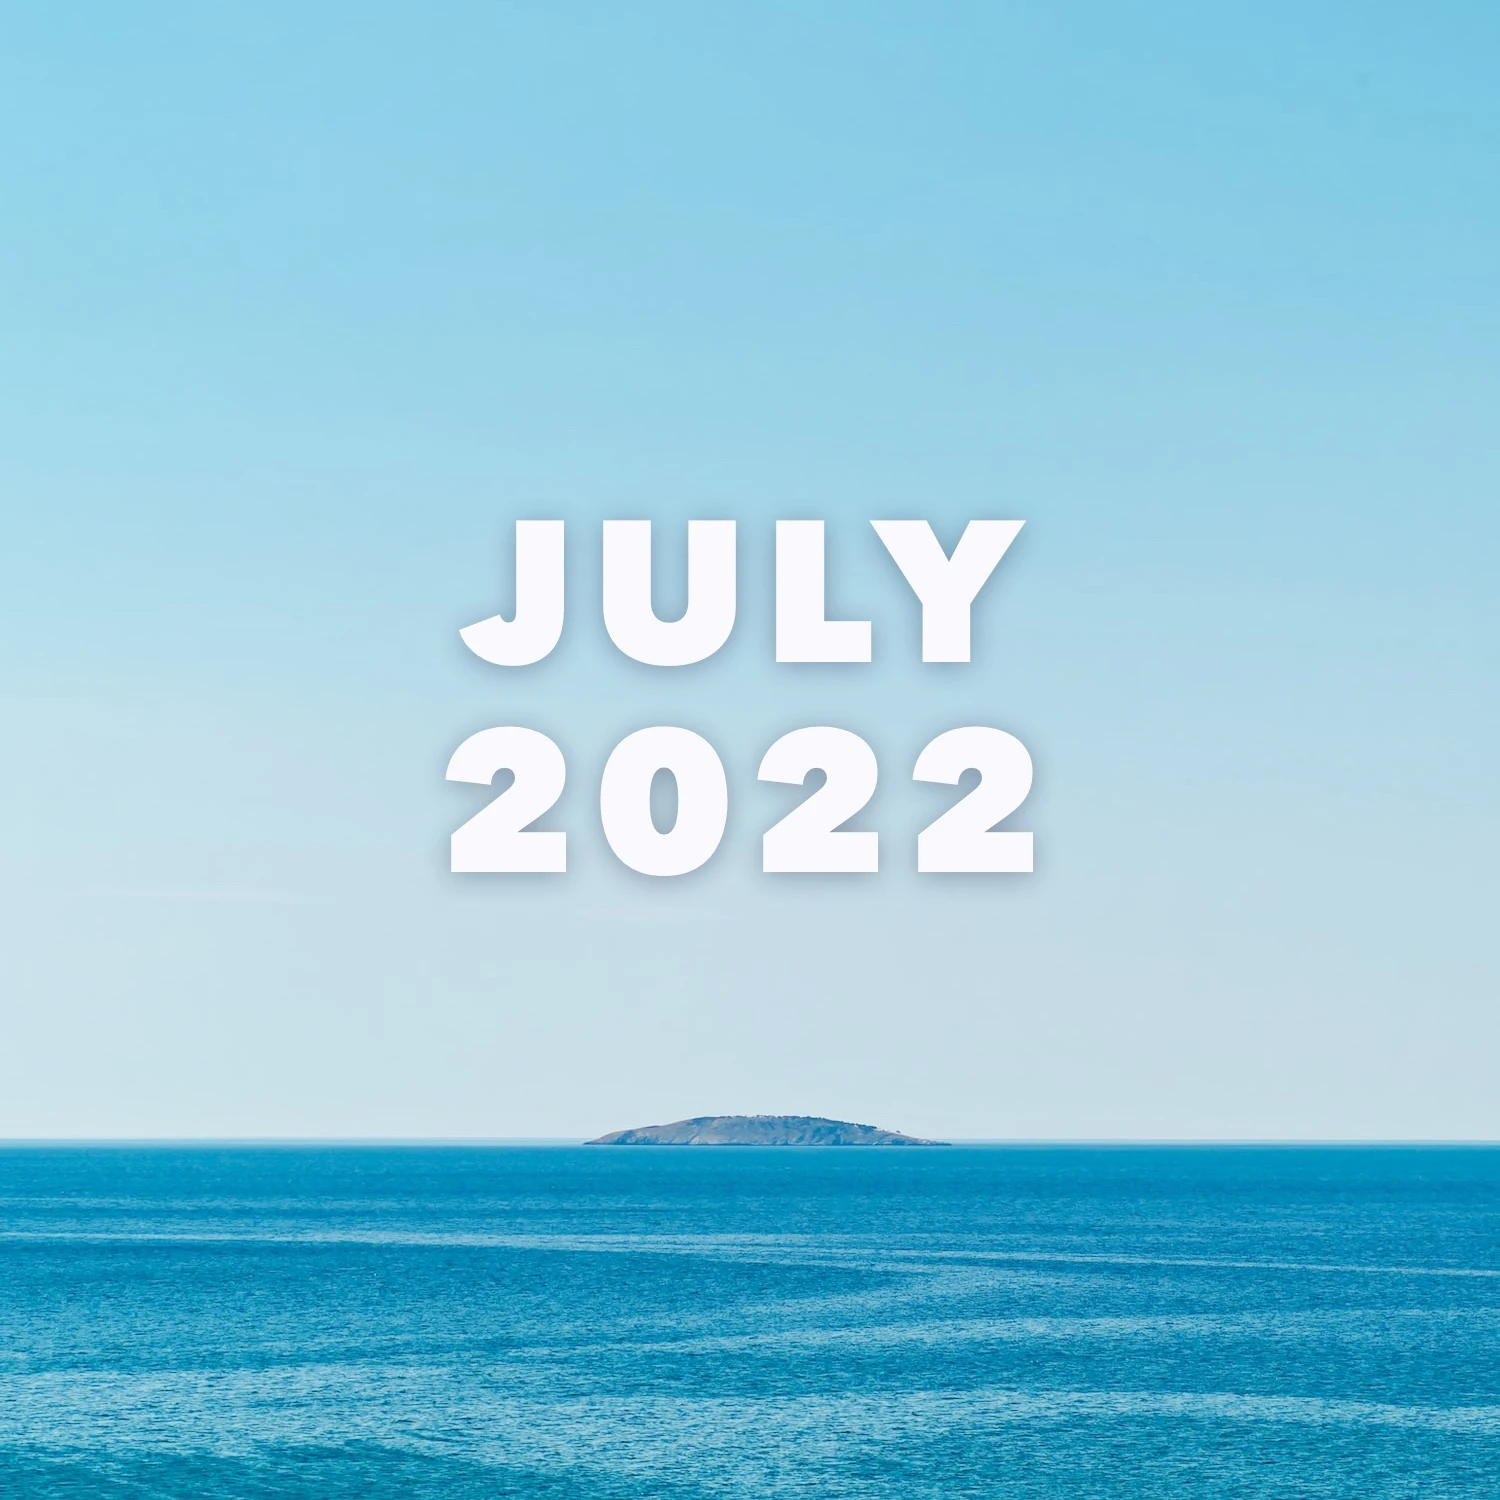 July 2022 text over ocean view